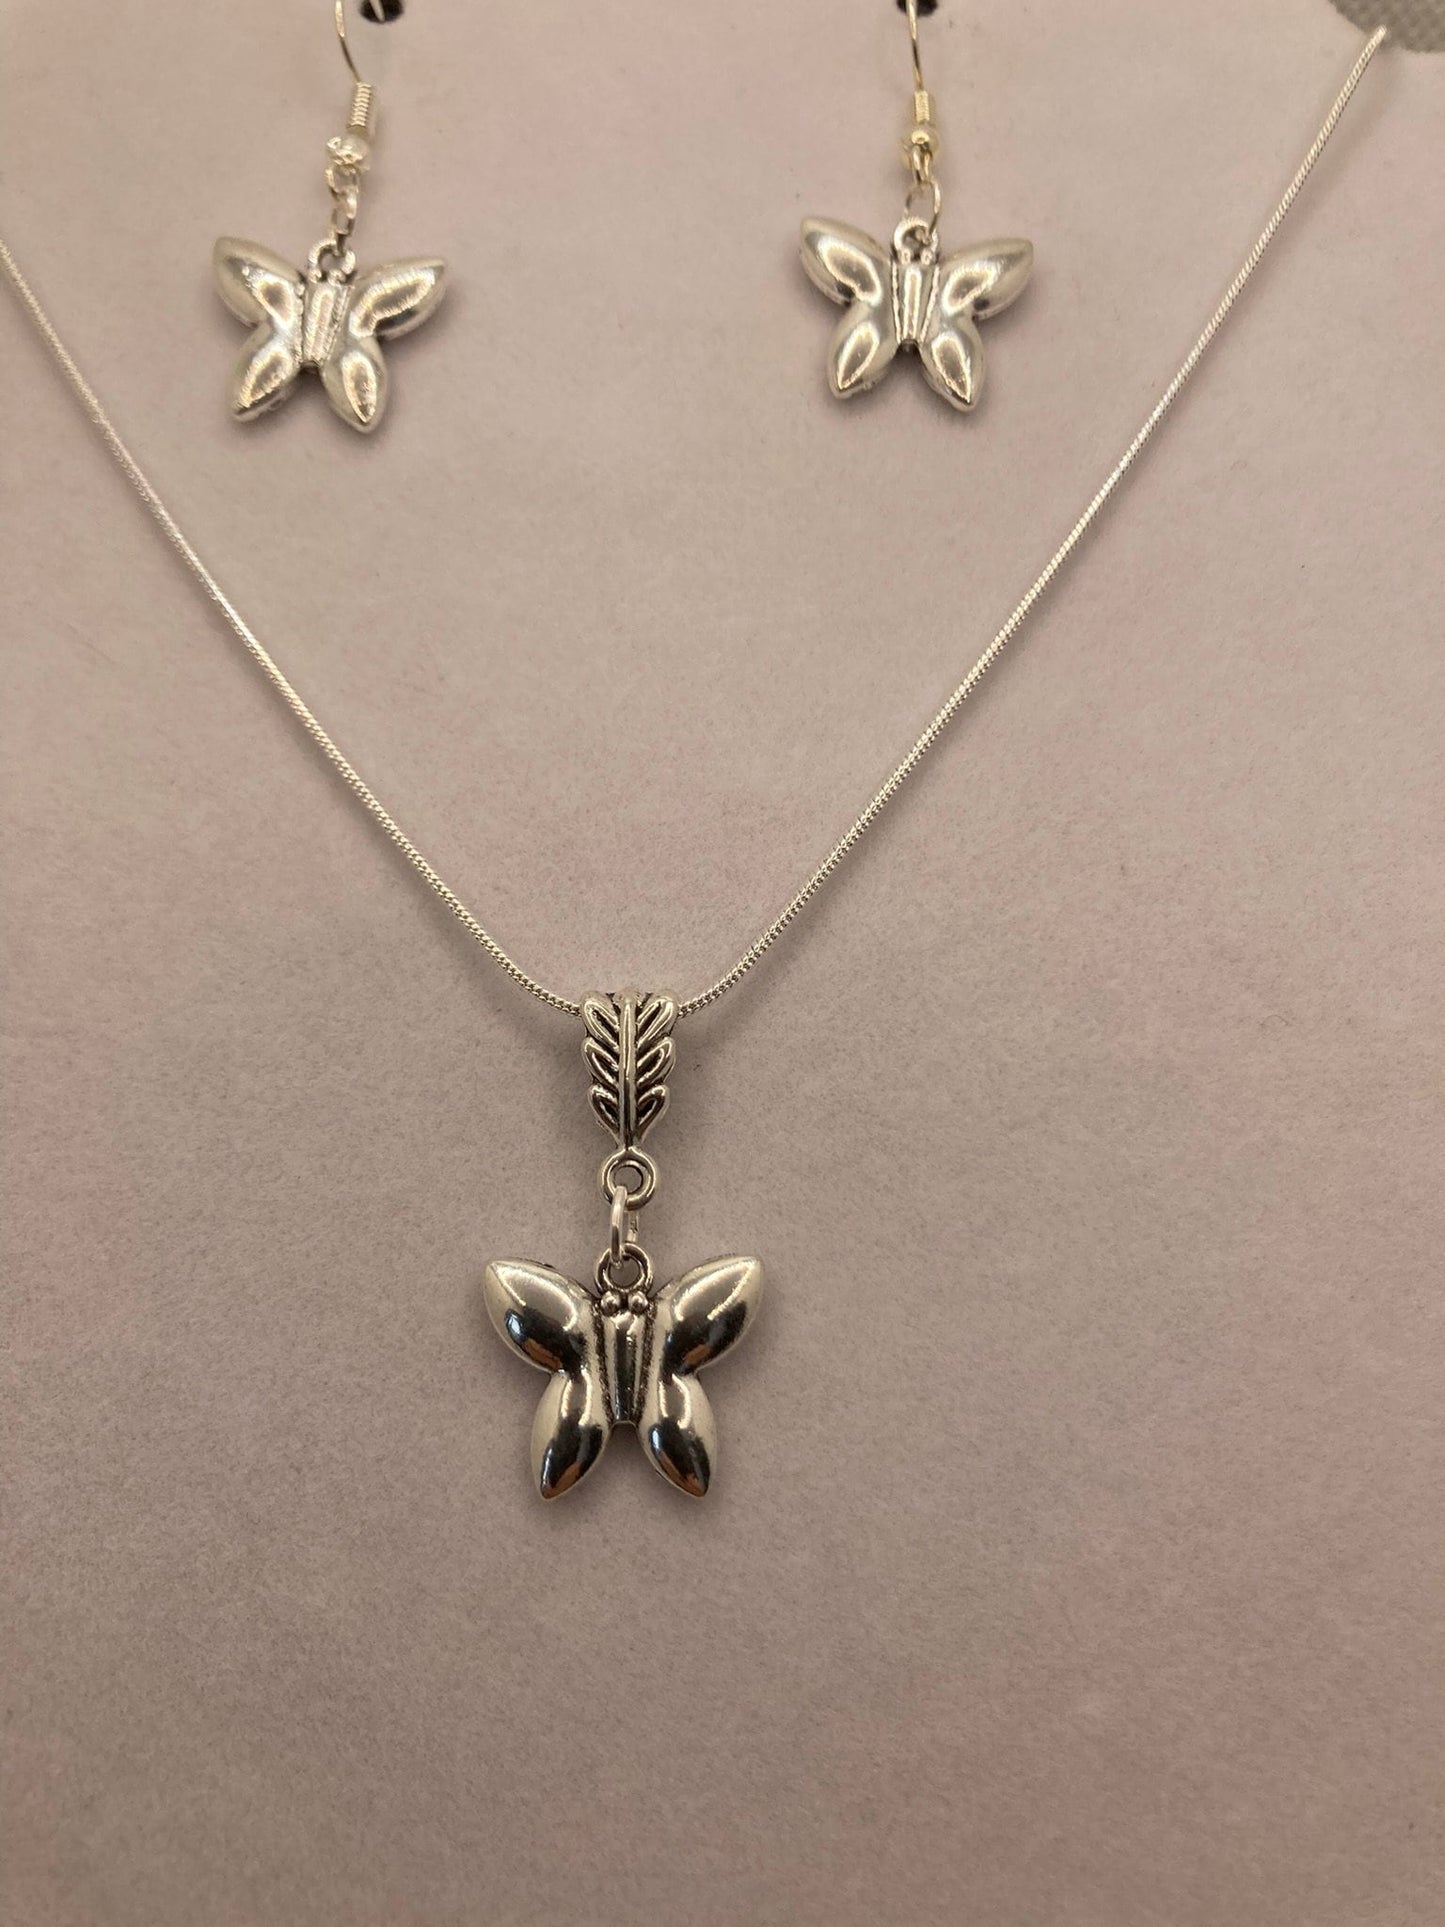 Butterfly Necklace and Earring Set with Specialty Chain, Southwest, Religious and Country Jewelry